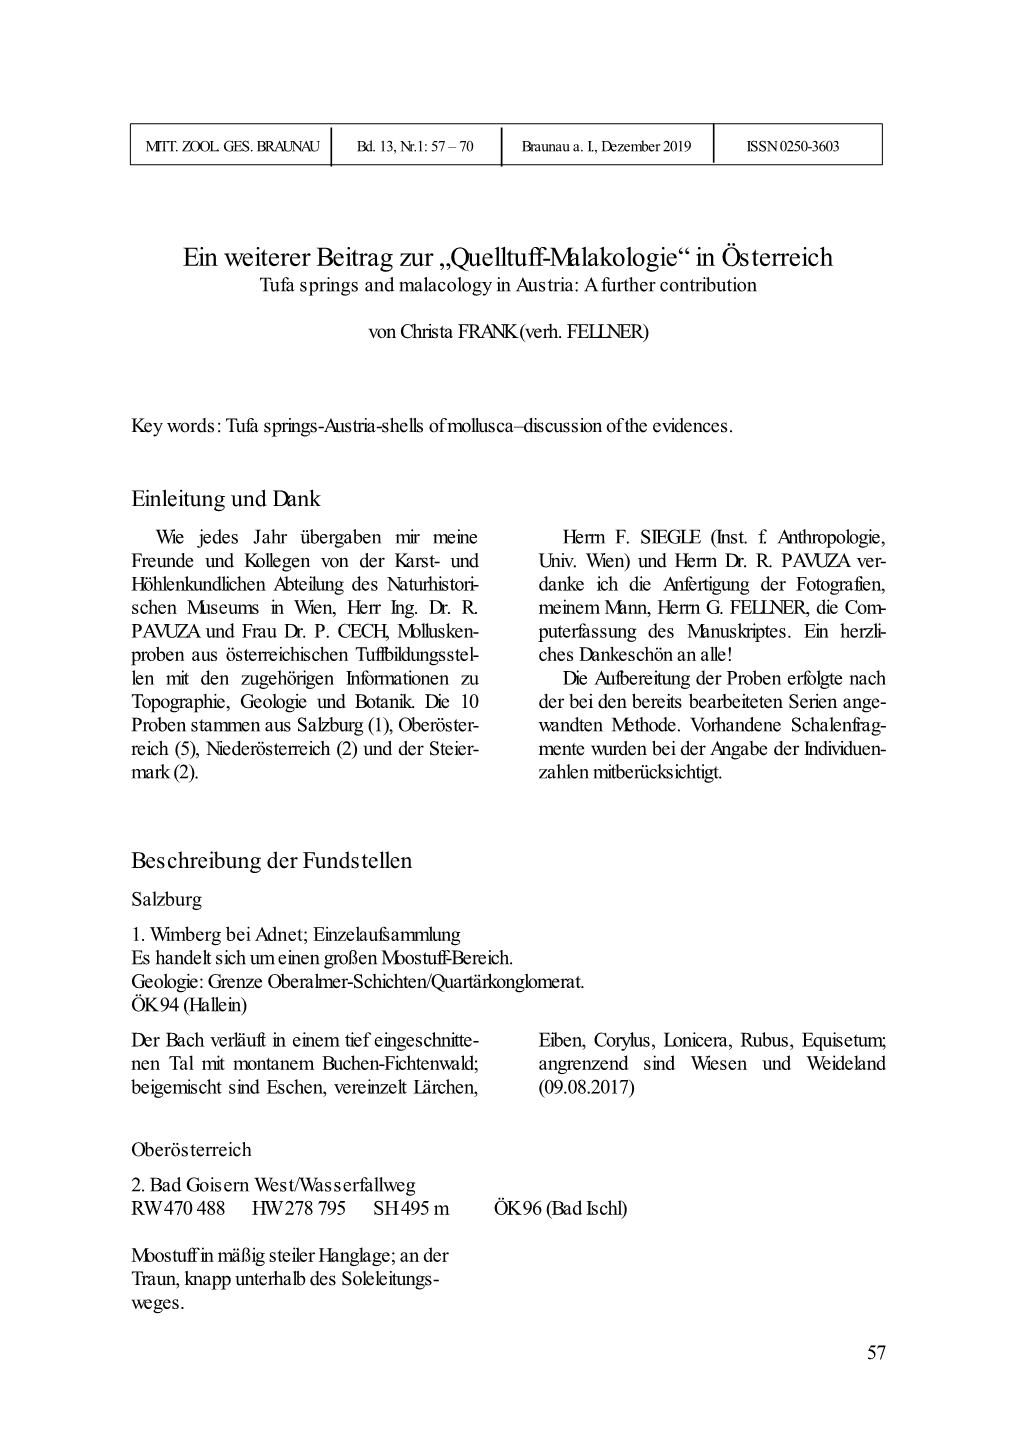 Quelltuff-Malakologie“ in Österreich Tufa Springs and Malacology in Austria: a Further Contribution